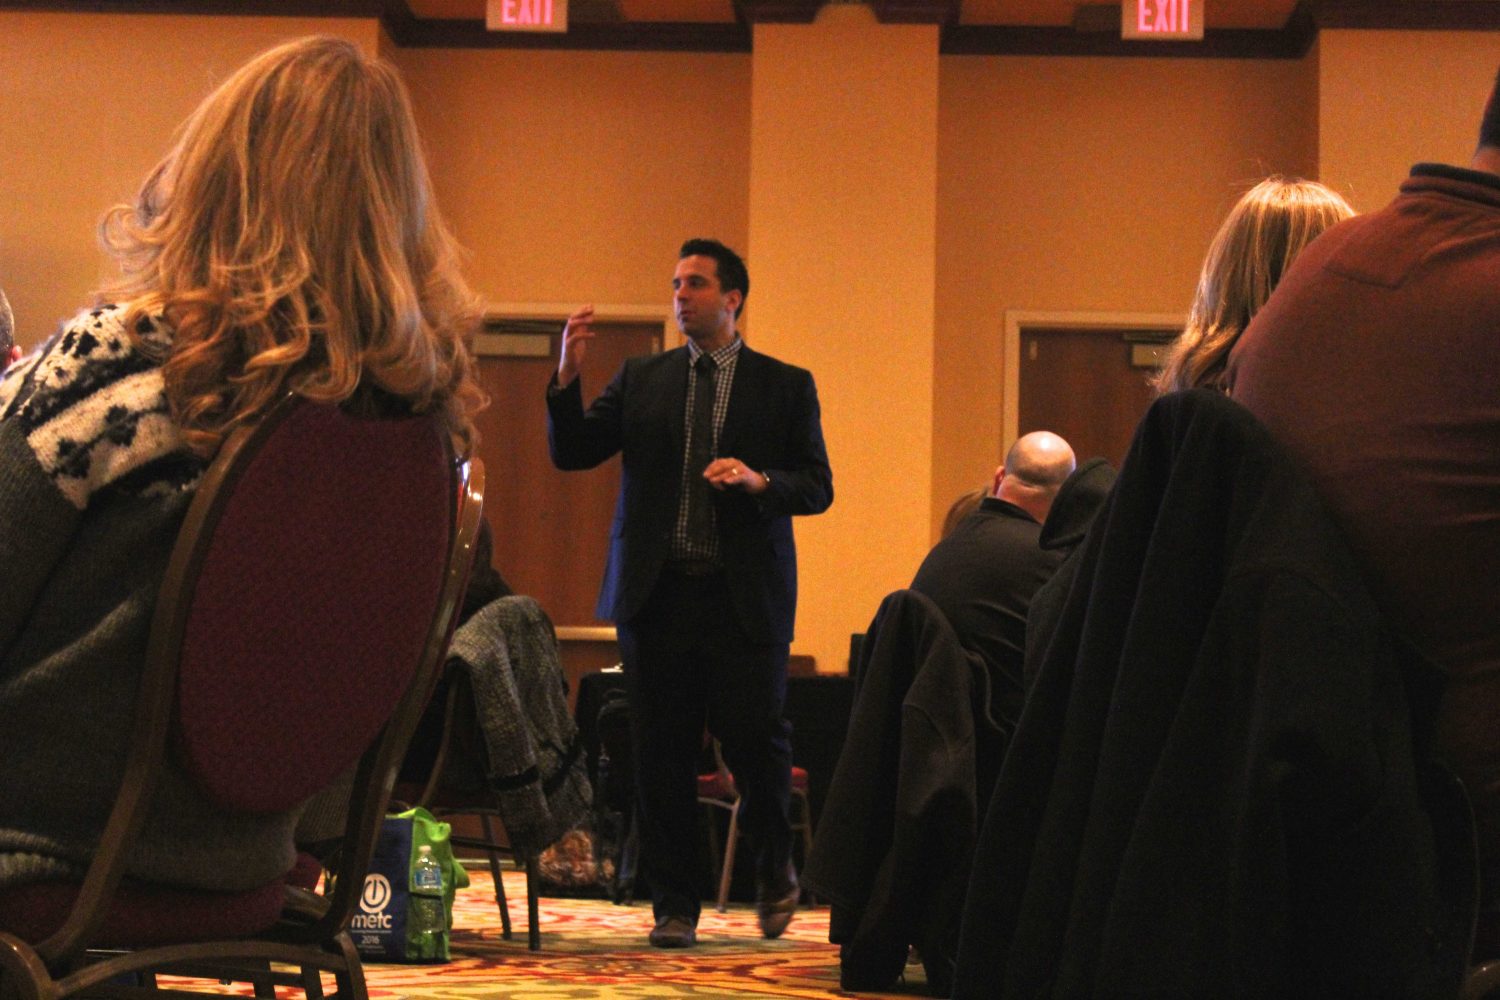 George Couros presents his session, Leadership Luncheon: Leading Innovative Change.